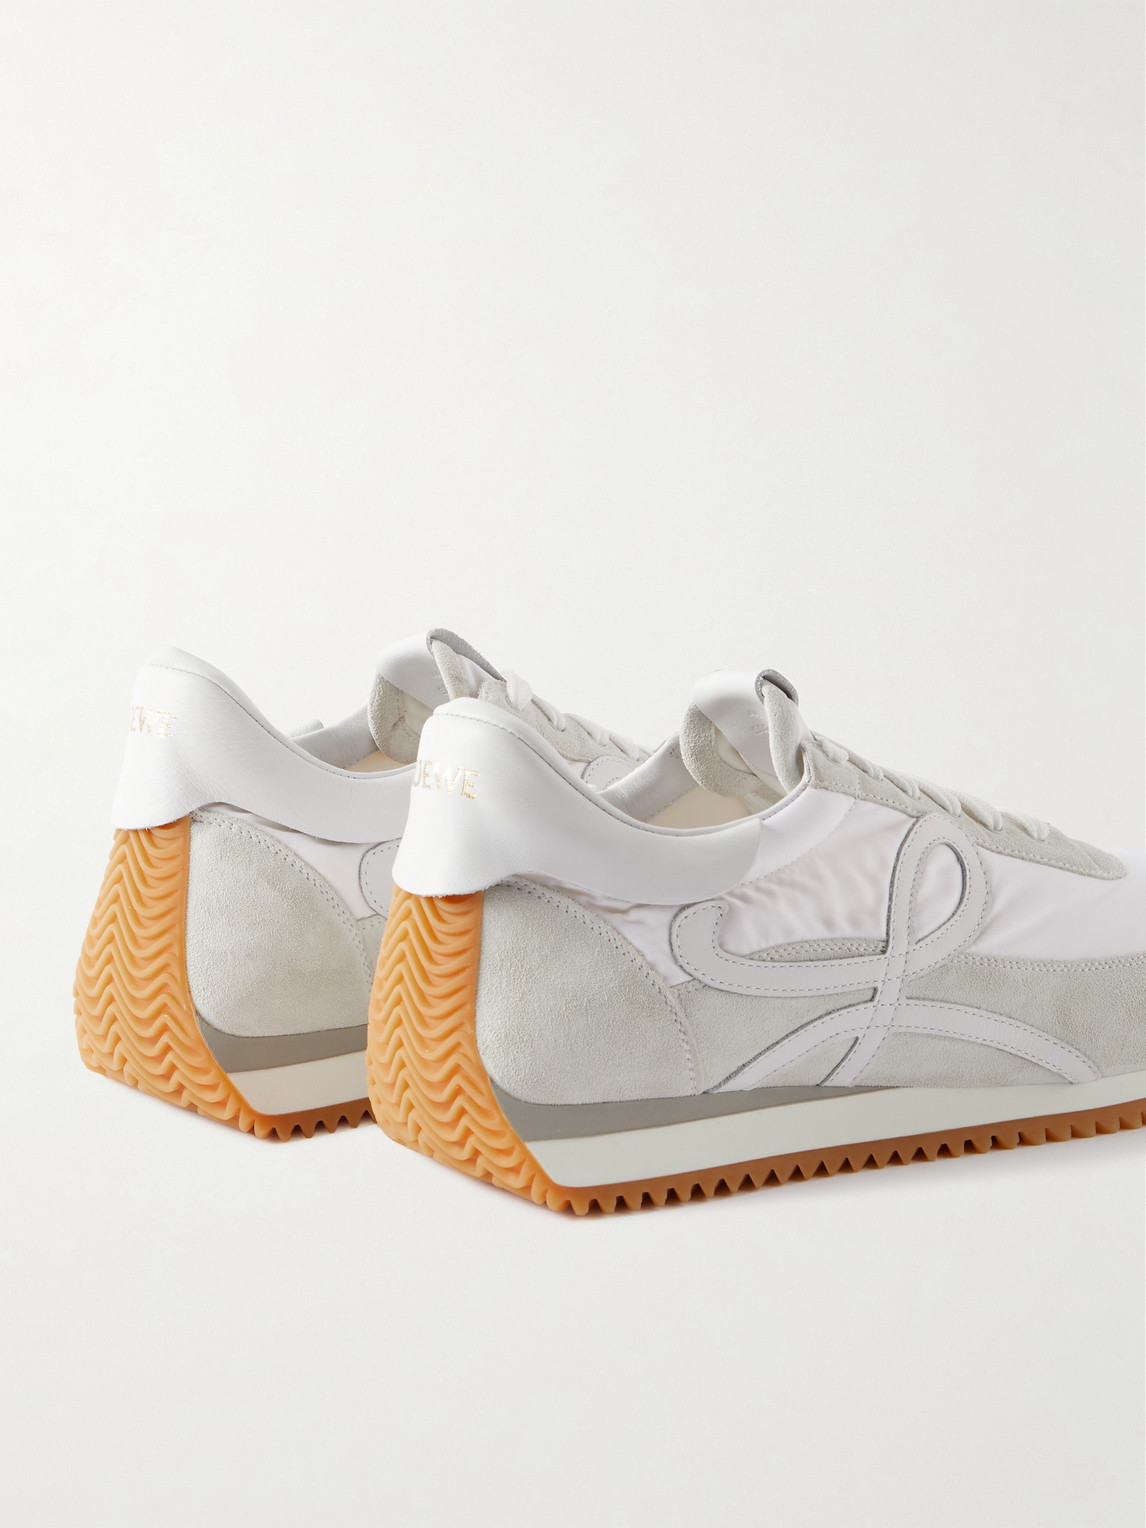 LOEWE FLOW RUNNER LEATHER-TRIMMED SUEDE AND NYLON SNEAKERS 